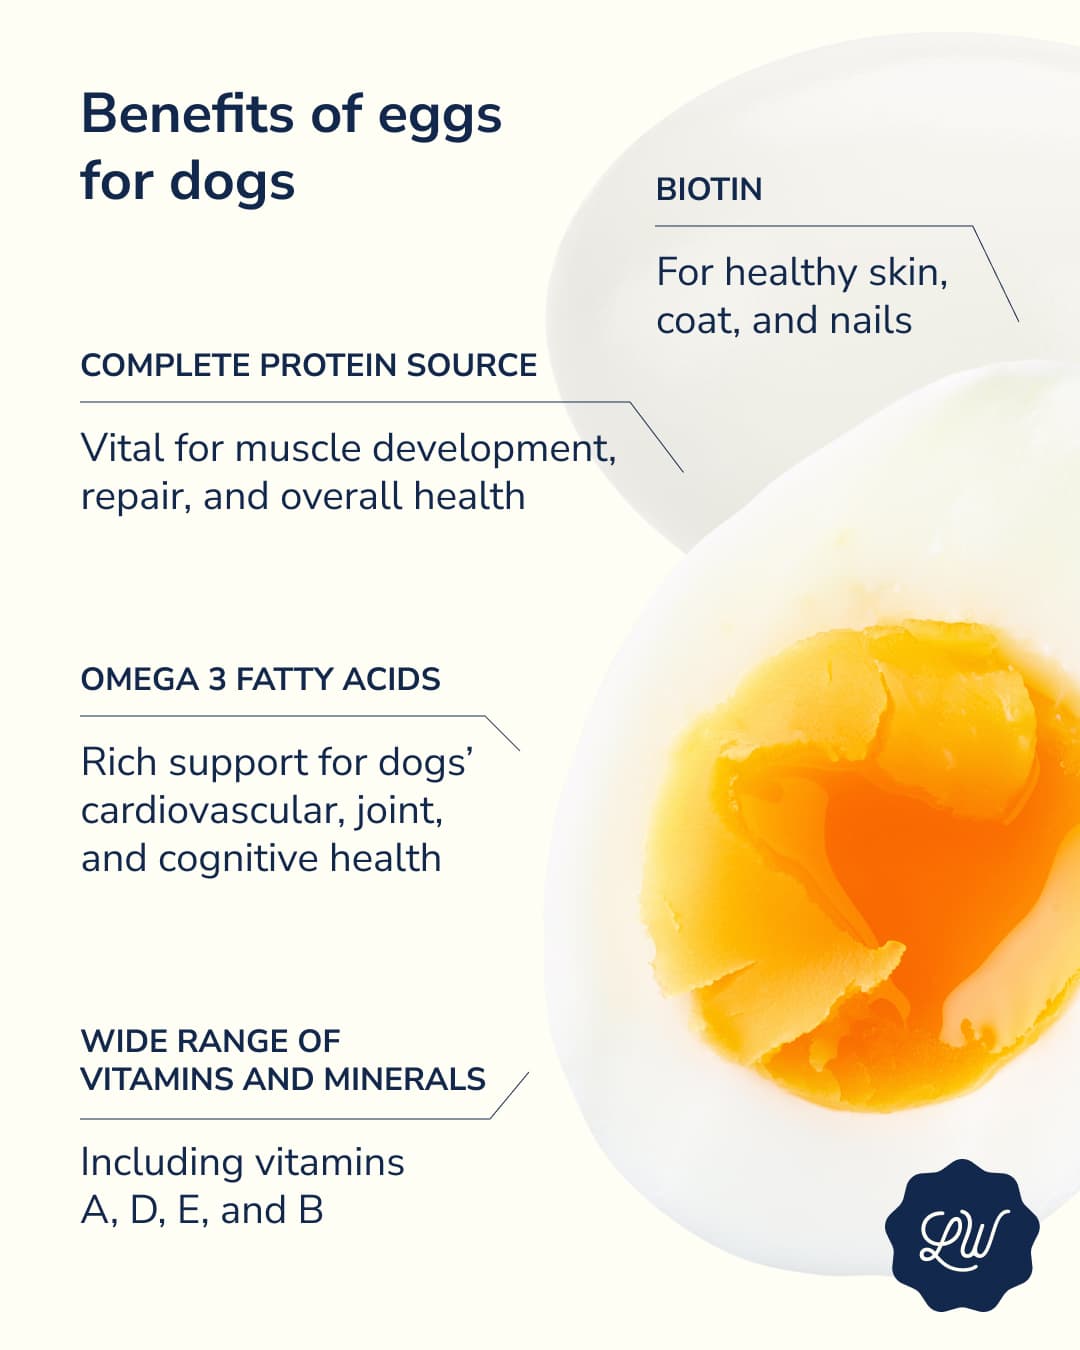 Benefits of Eggs for dogs